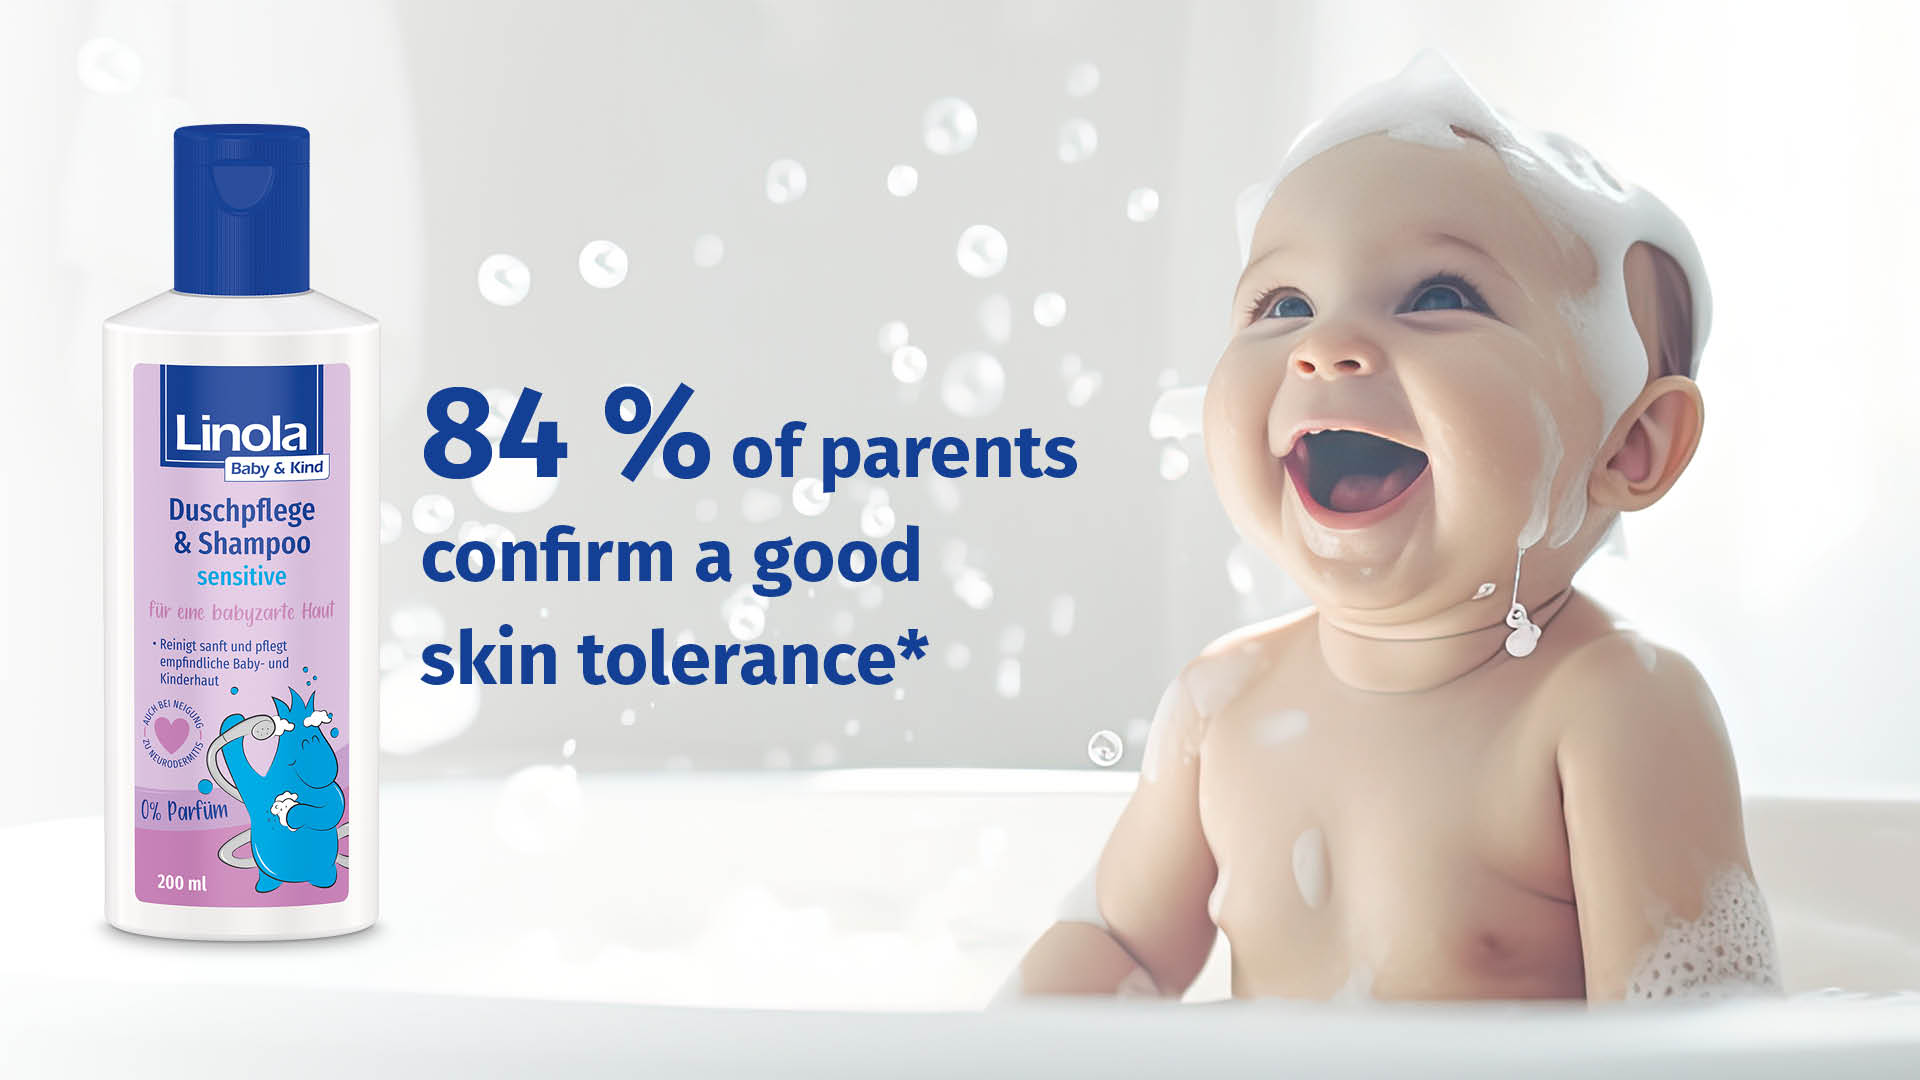 Baby laughing while sitting in a bathtub with soaps in the background, next to a bottle of Linola Baby & Child Sensitive Shower Gel and Shampoo, and the user test result showing that 84% of parents confirm the product's good skin compatibility